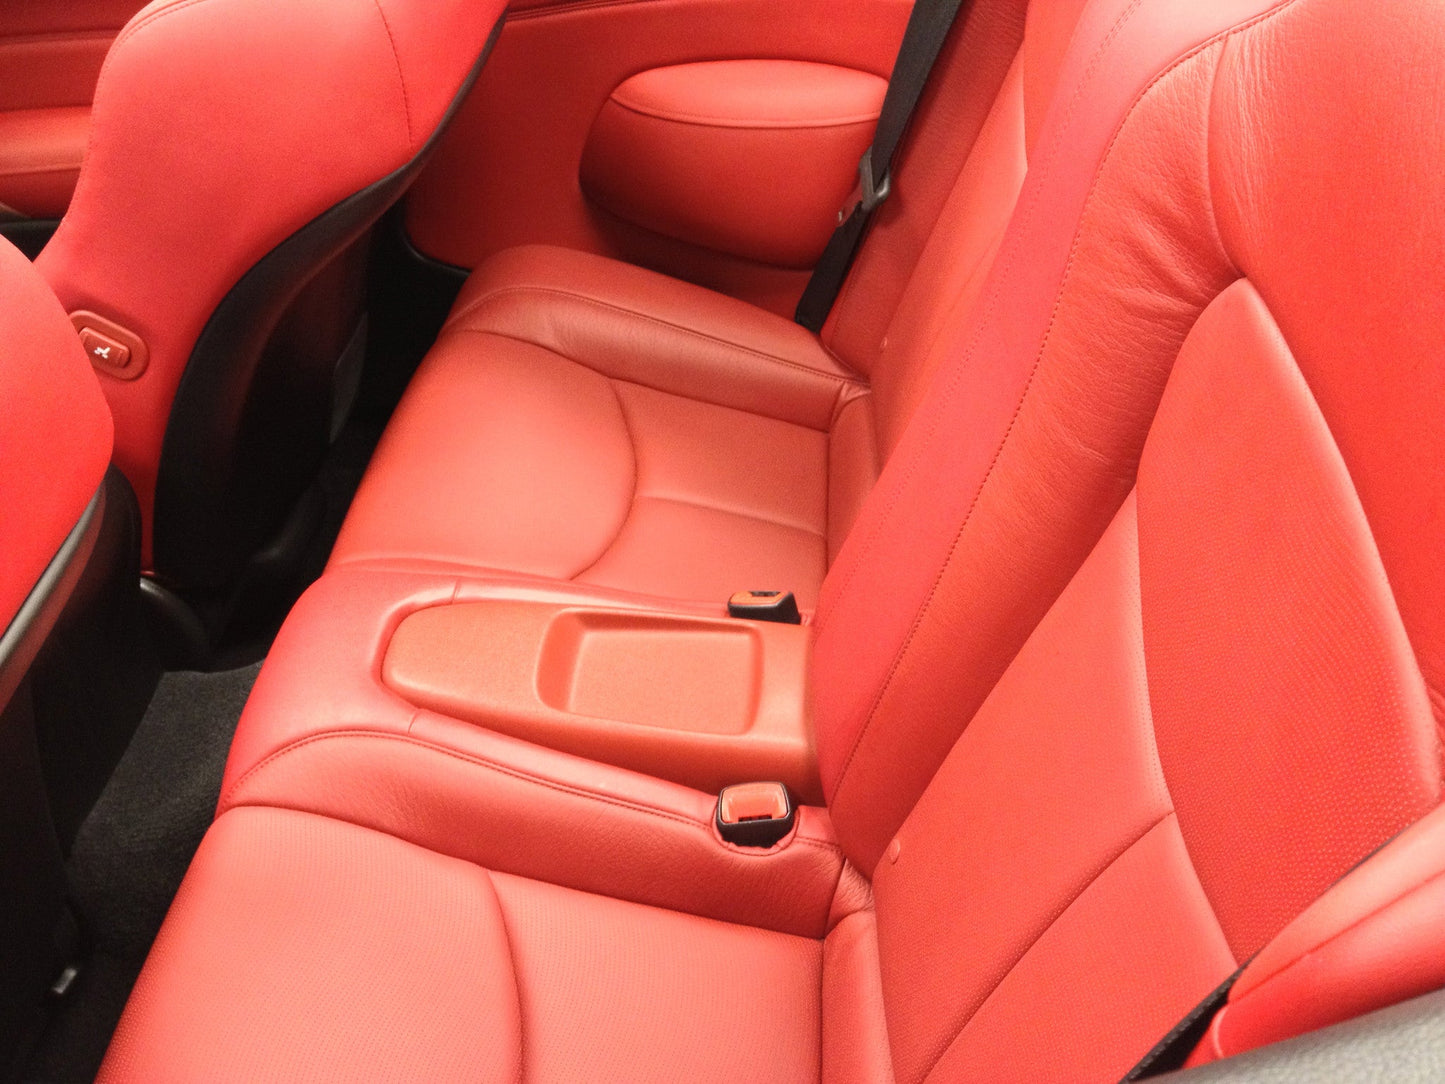 LUX COCKPIT LEATHER CLEANER